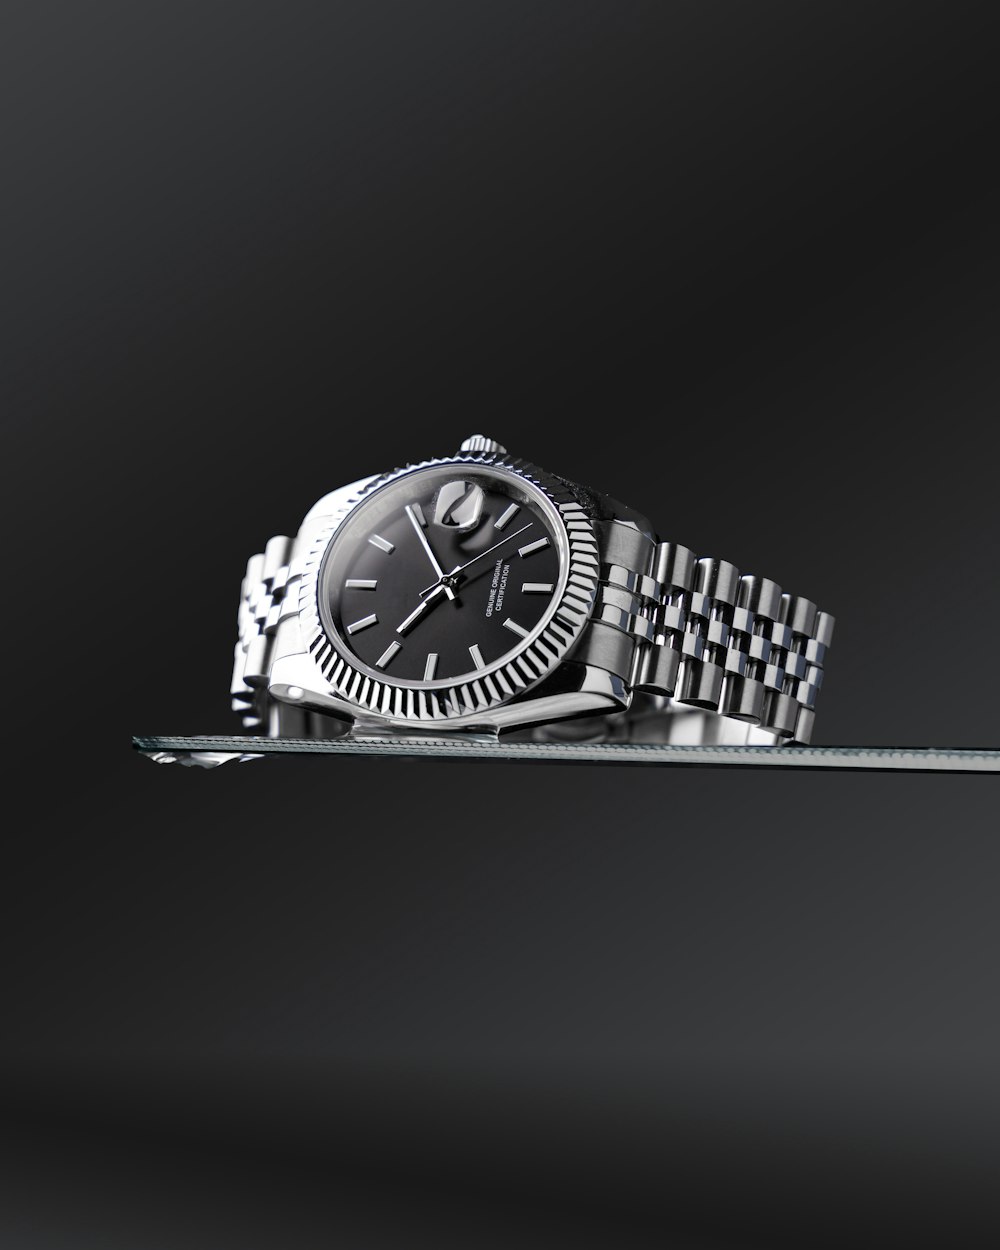 a rolex watch on a tray with a black background